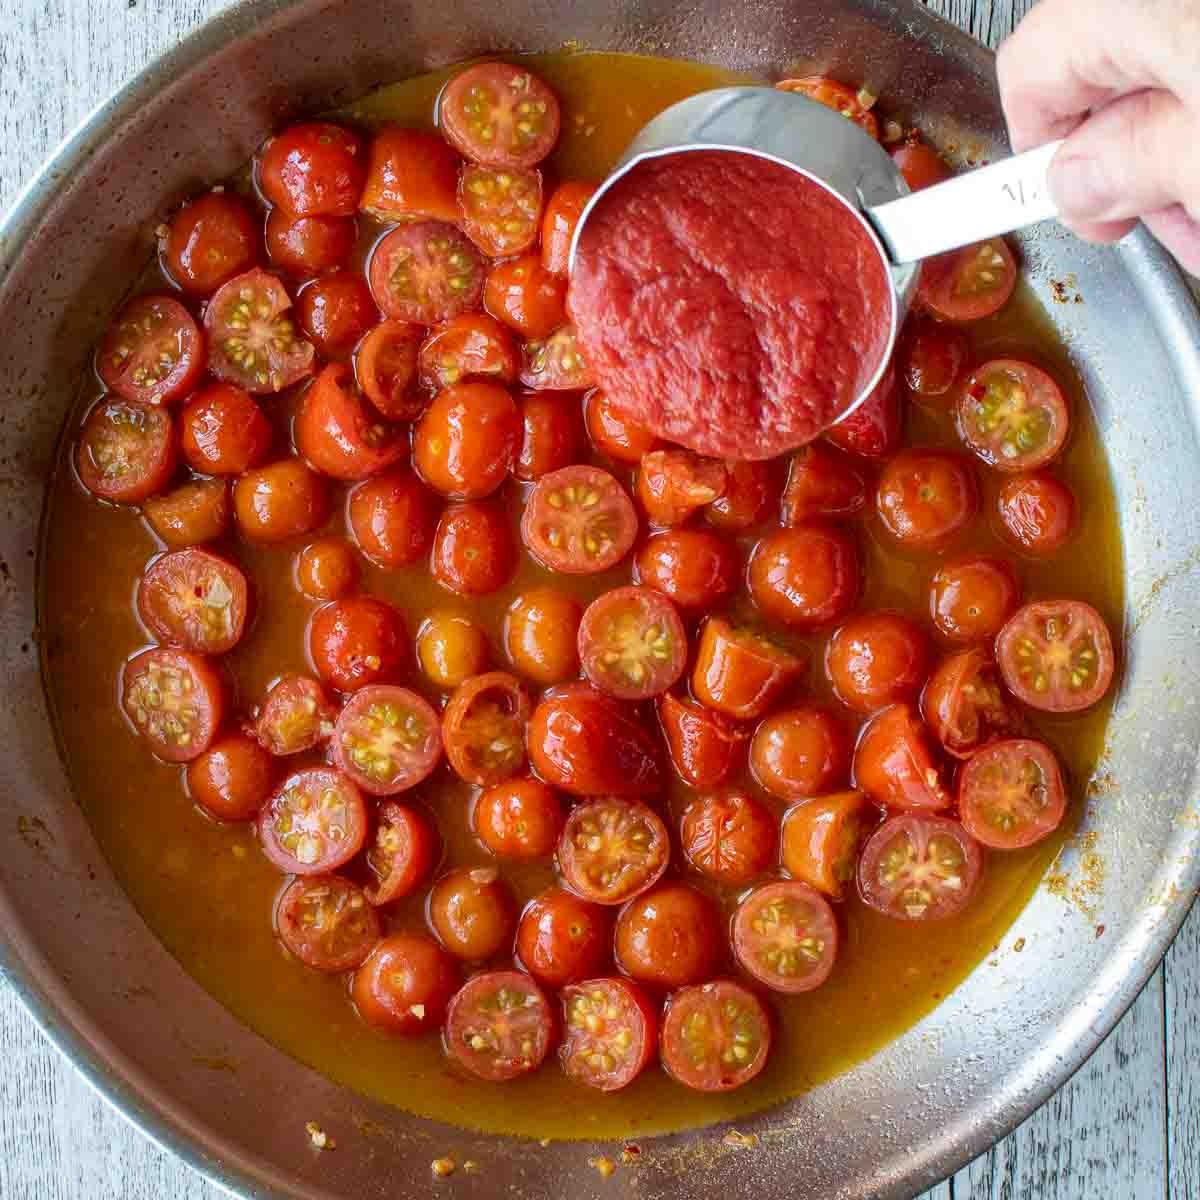 Tomato puree being poured into a pan of halved cherry tomatoes and more reddish liquid.